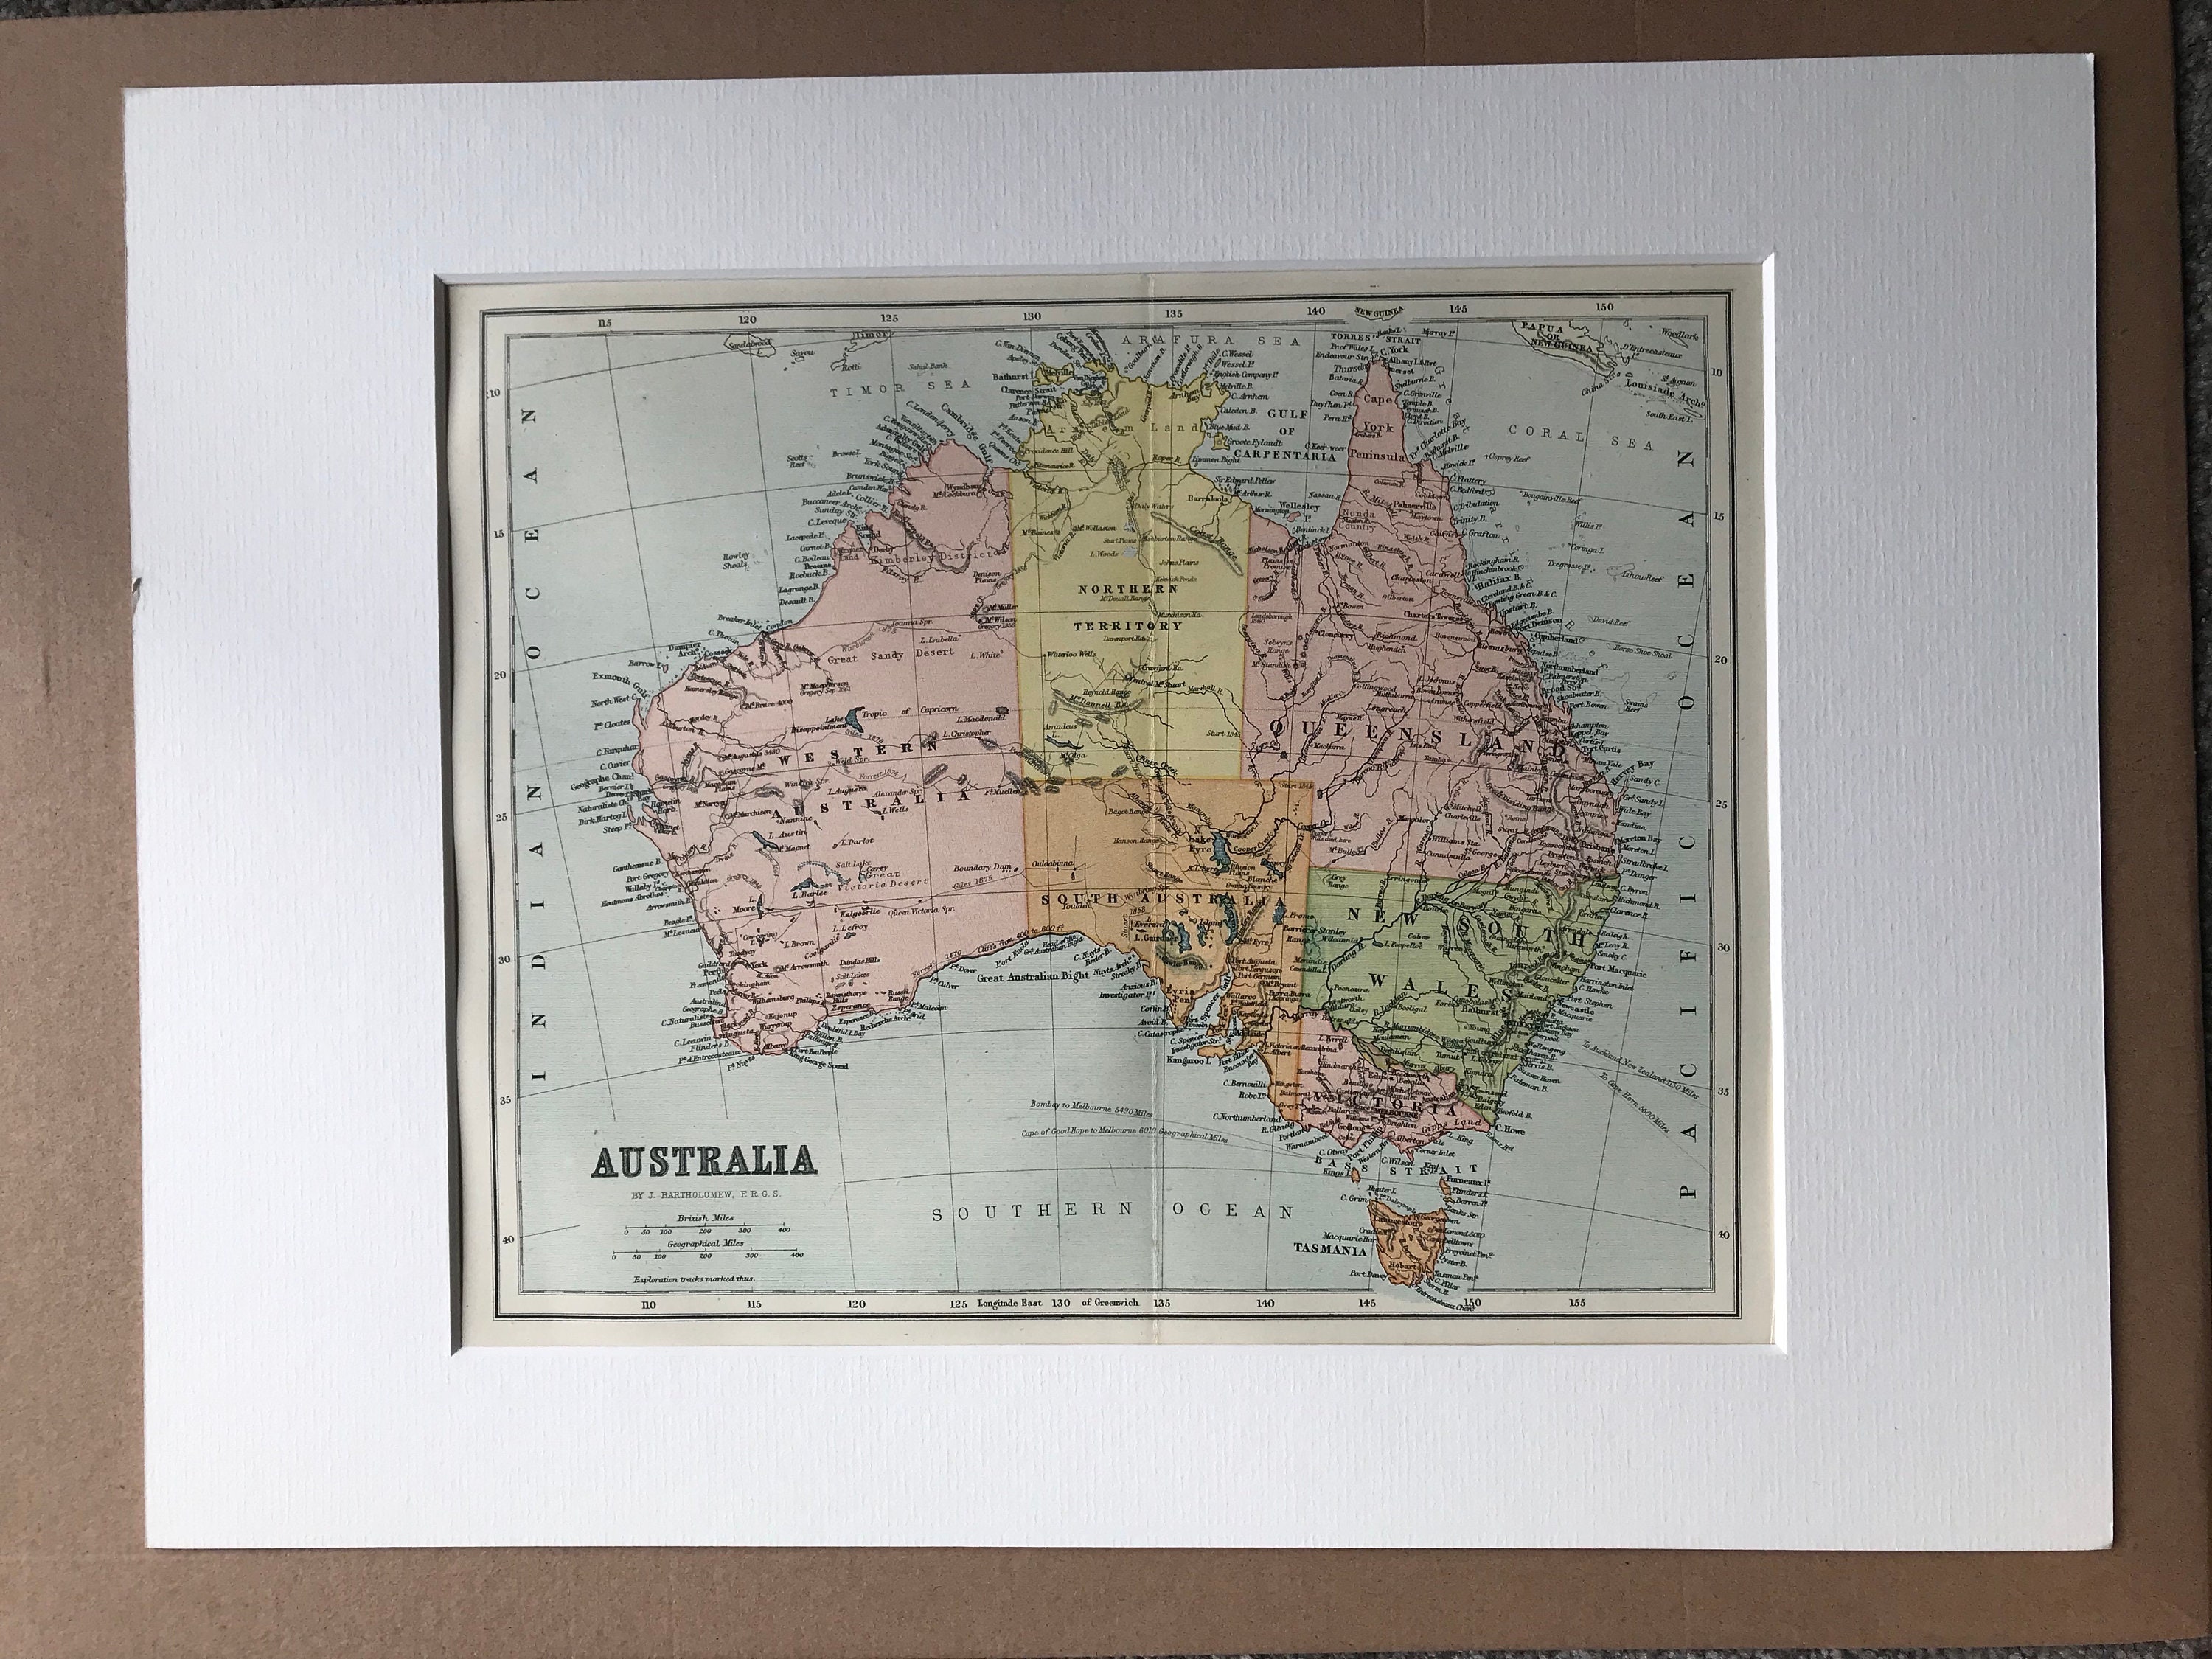 Available Mounted and Matted 1904 Queensland Original Antique Map Vintage Wall Map Australia